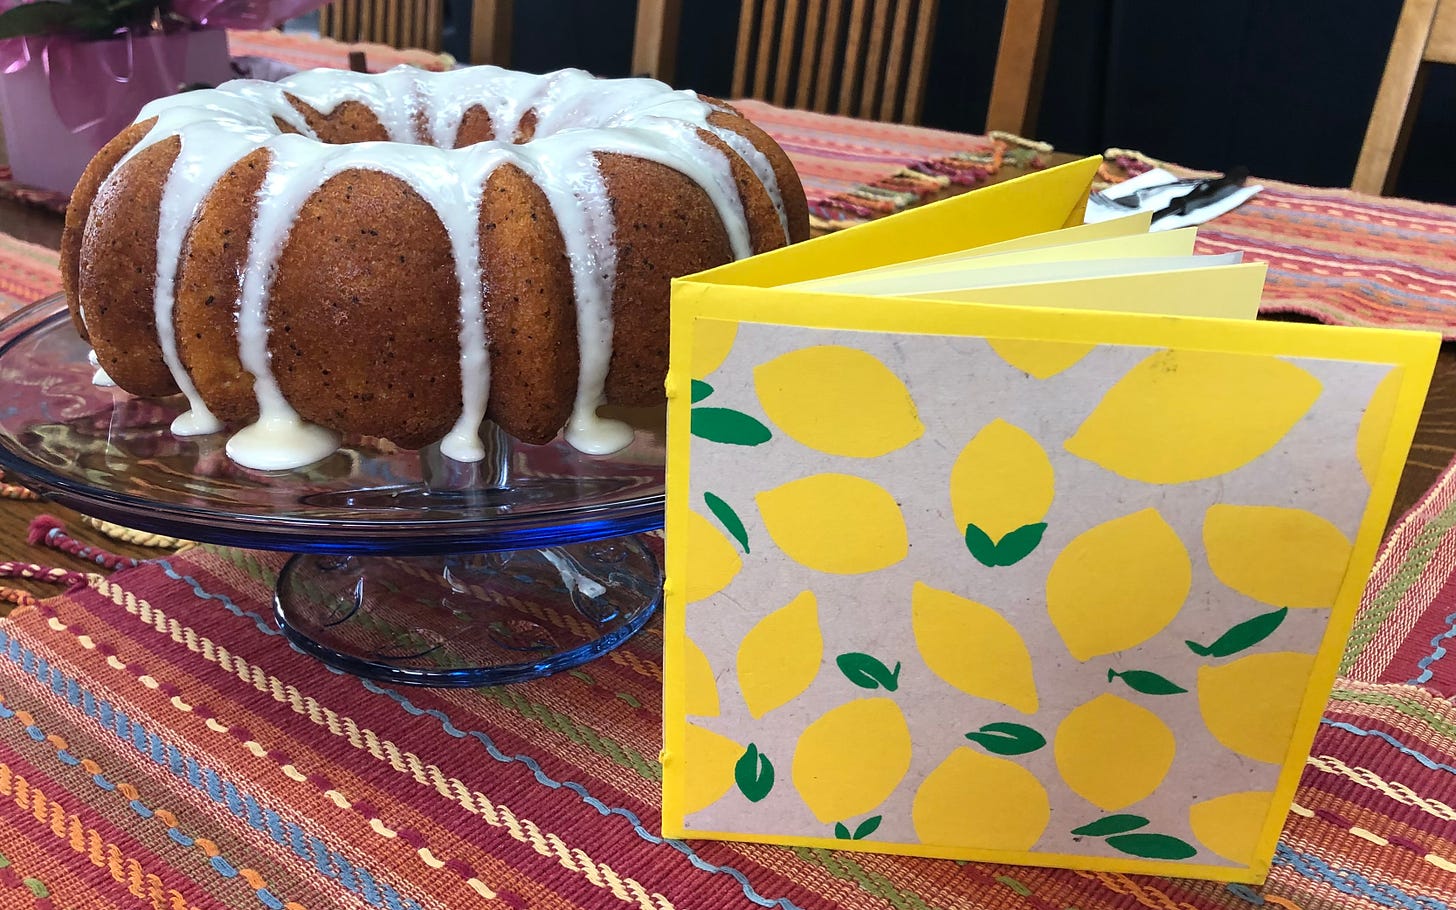 A lemon Bundt cake with a card in front of it. The card has images of lemons on the face.